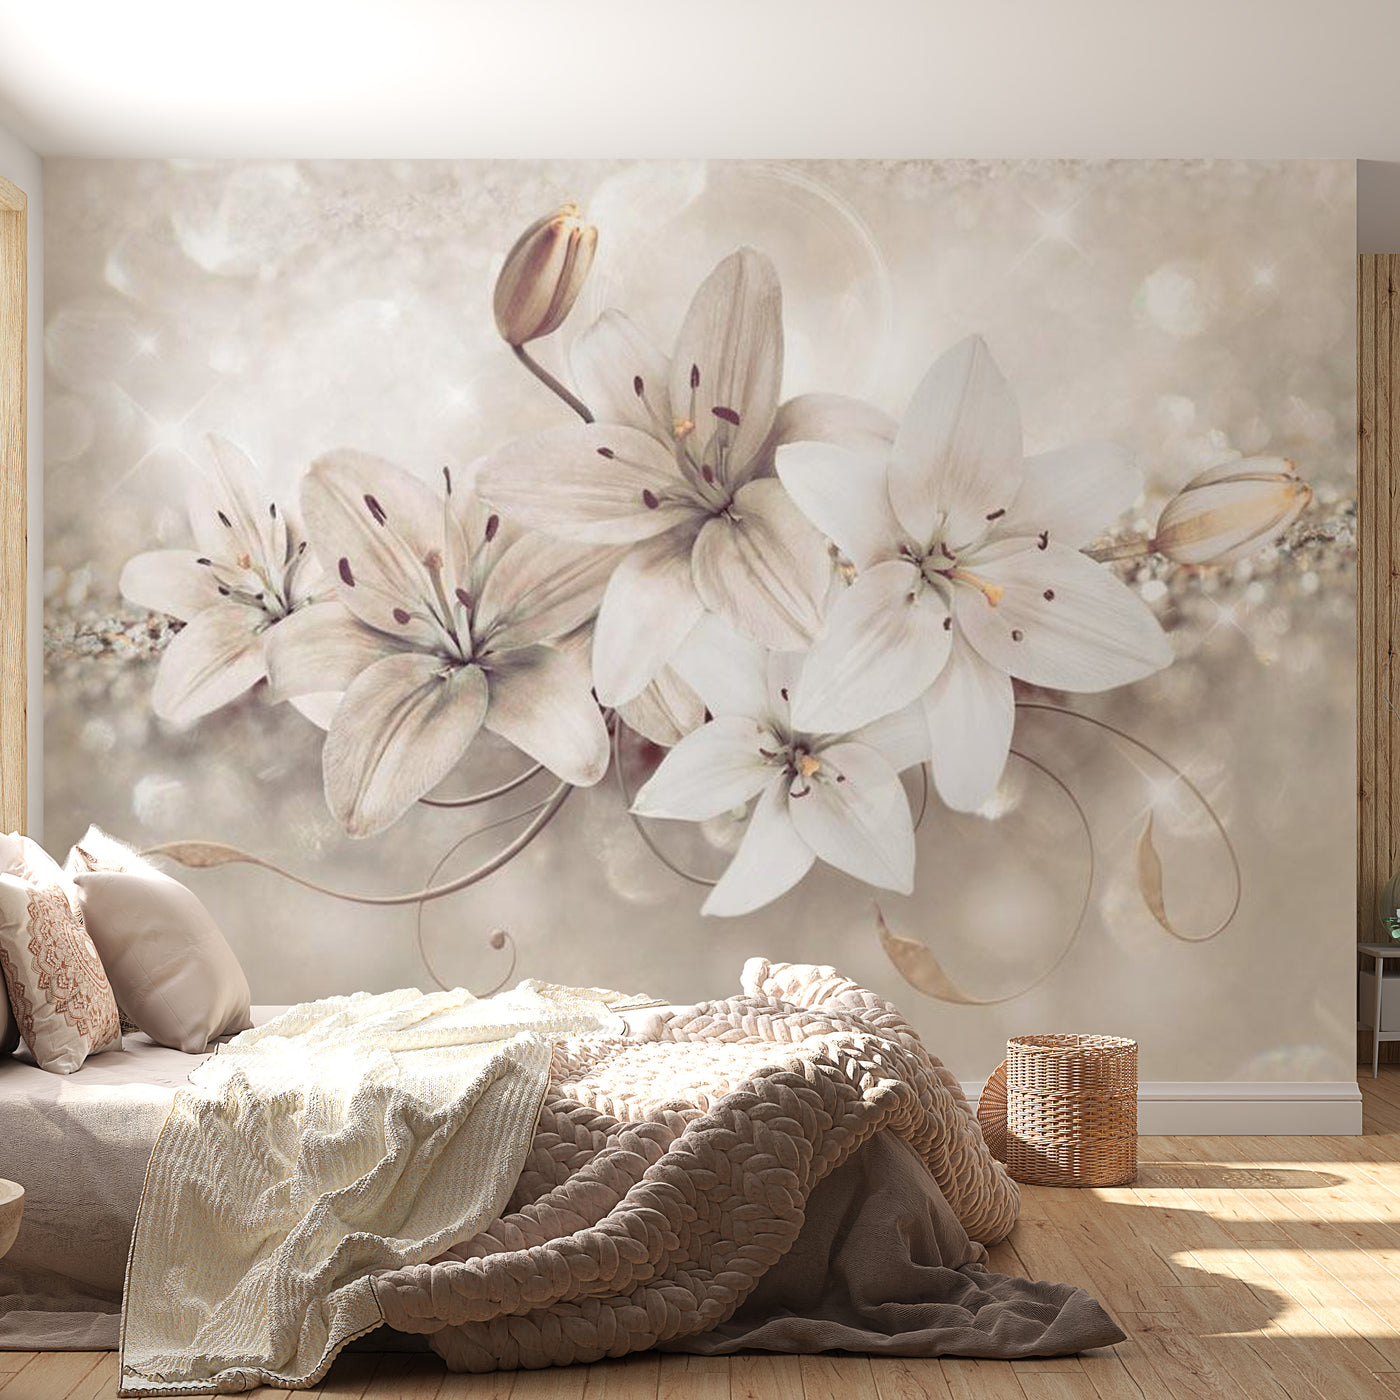 Peel & Stick Floral Wall Mural - Diamond Lilies - Removable Wall Decals